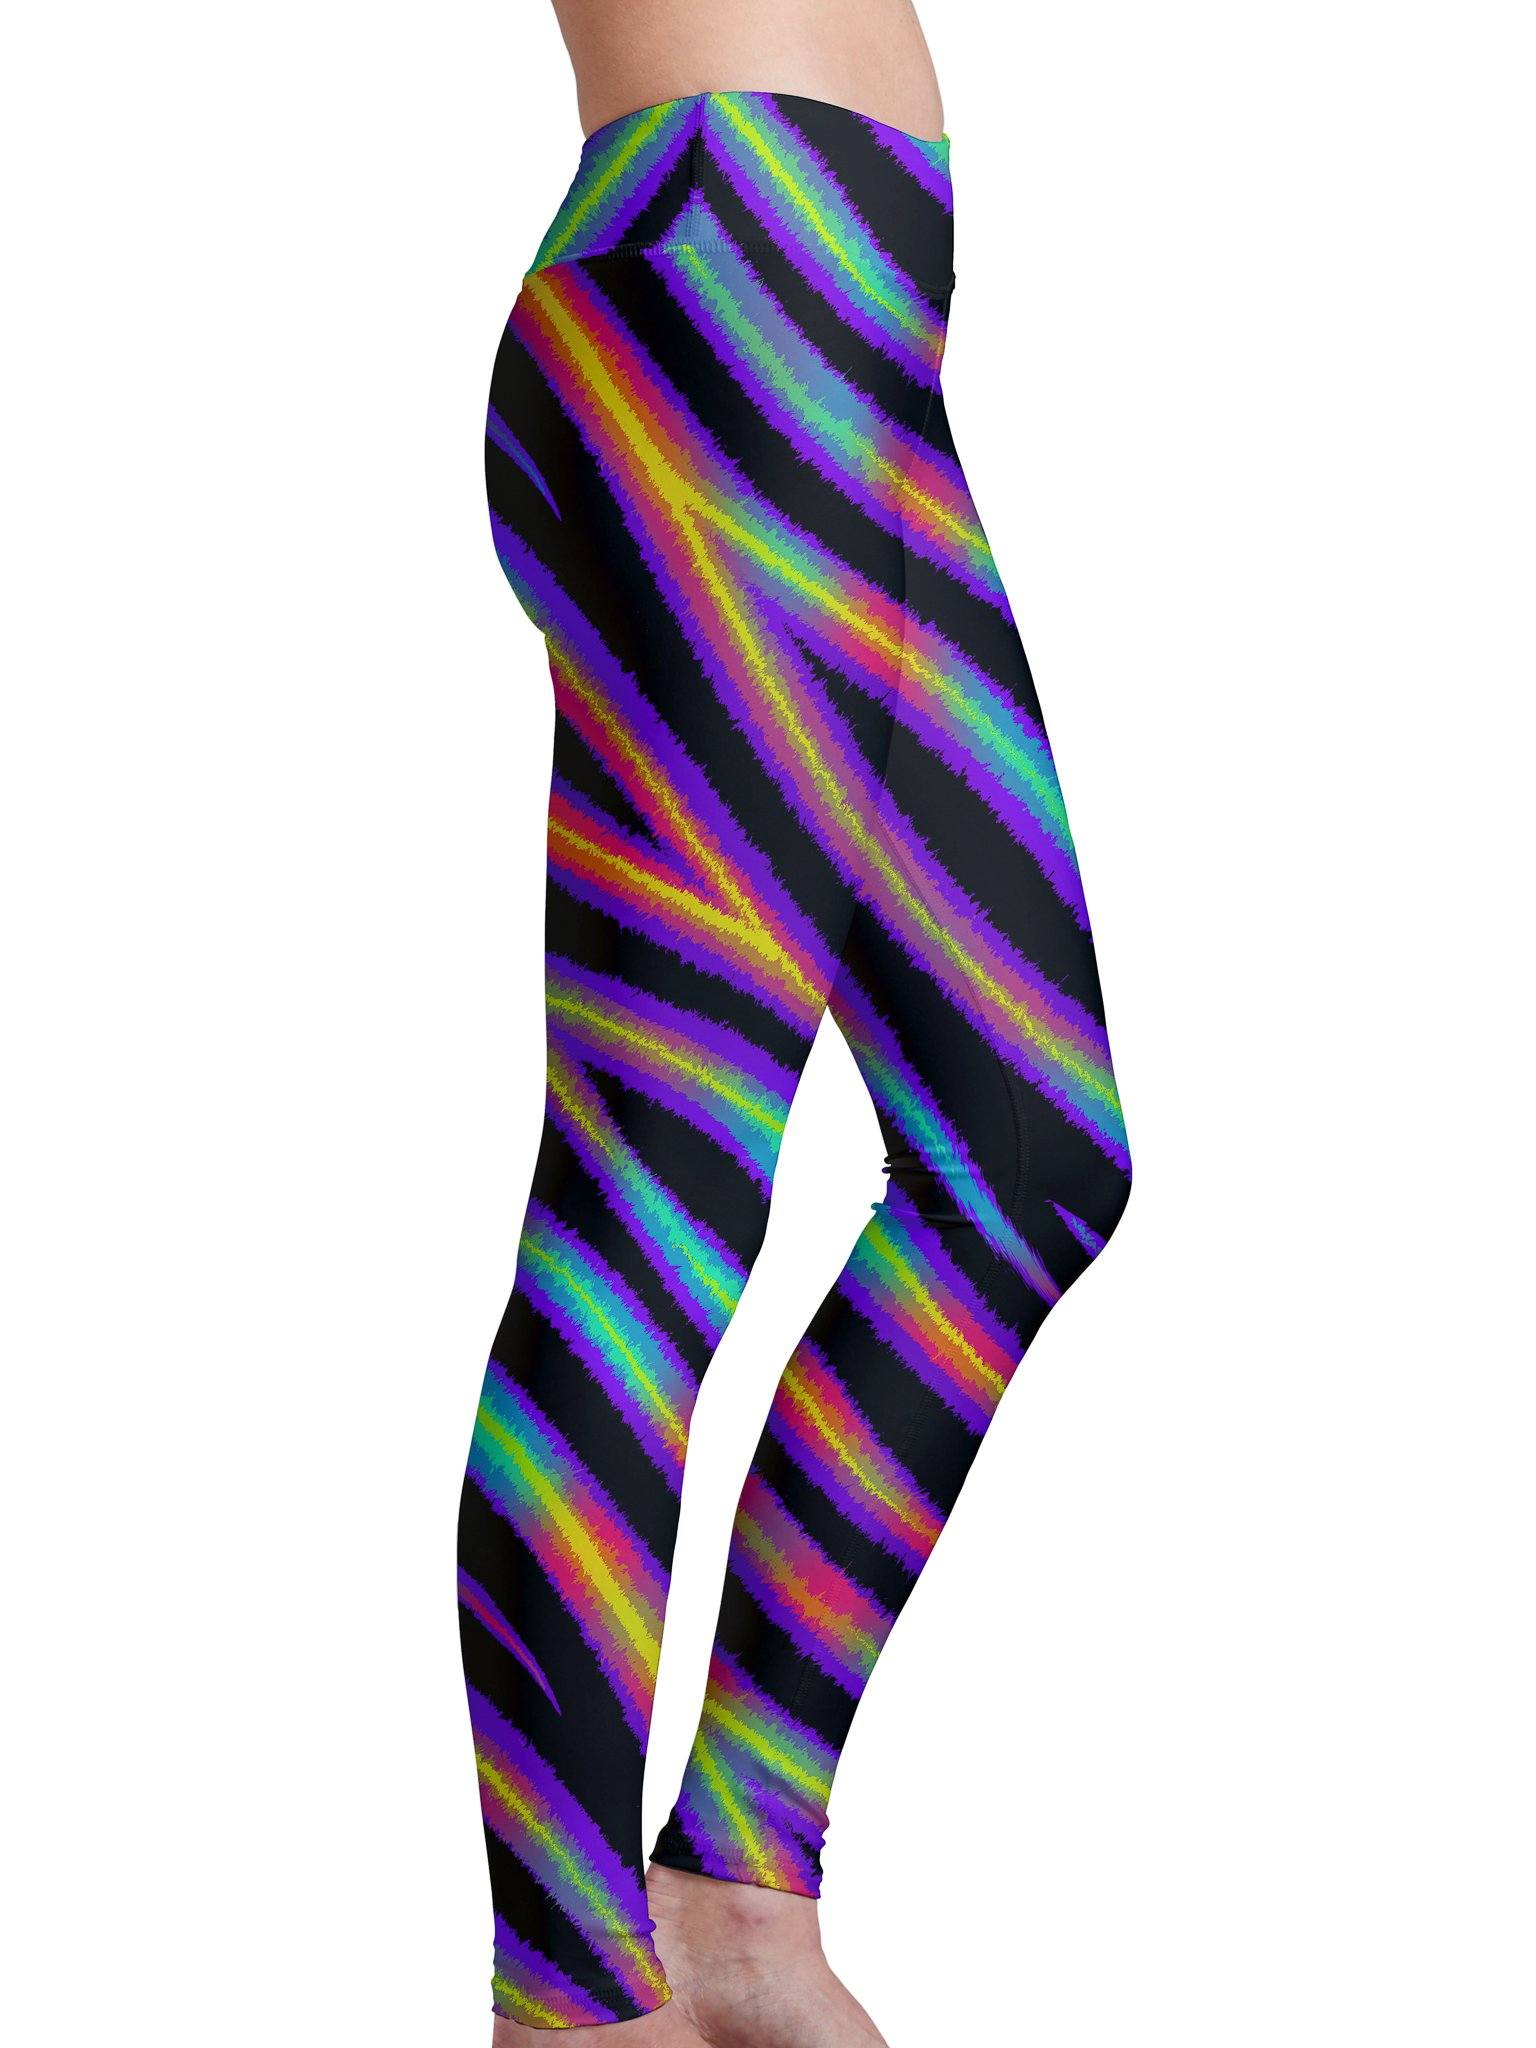 Tiger Stripes (Colorful) Leggings - Electro Threads